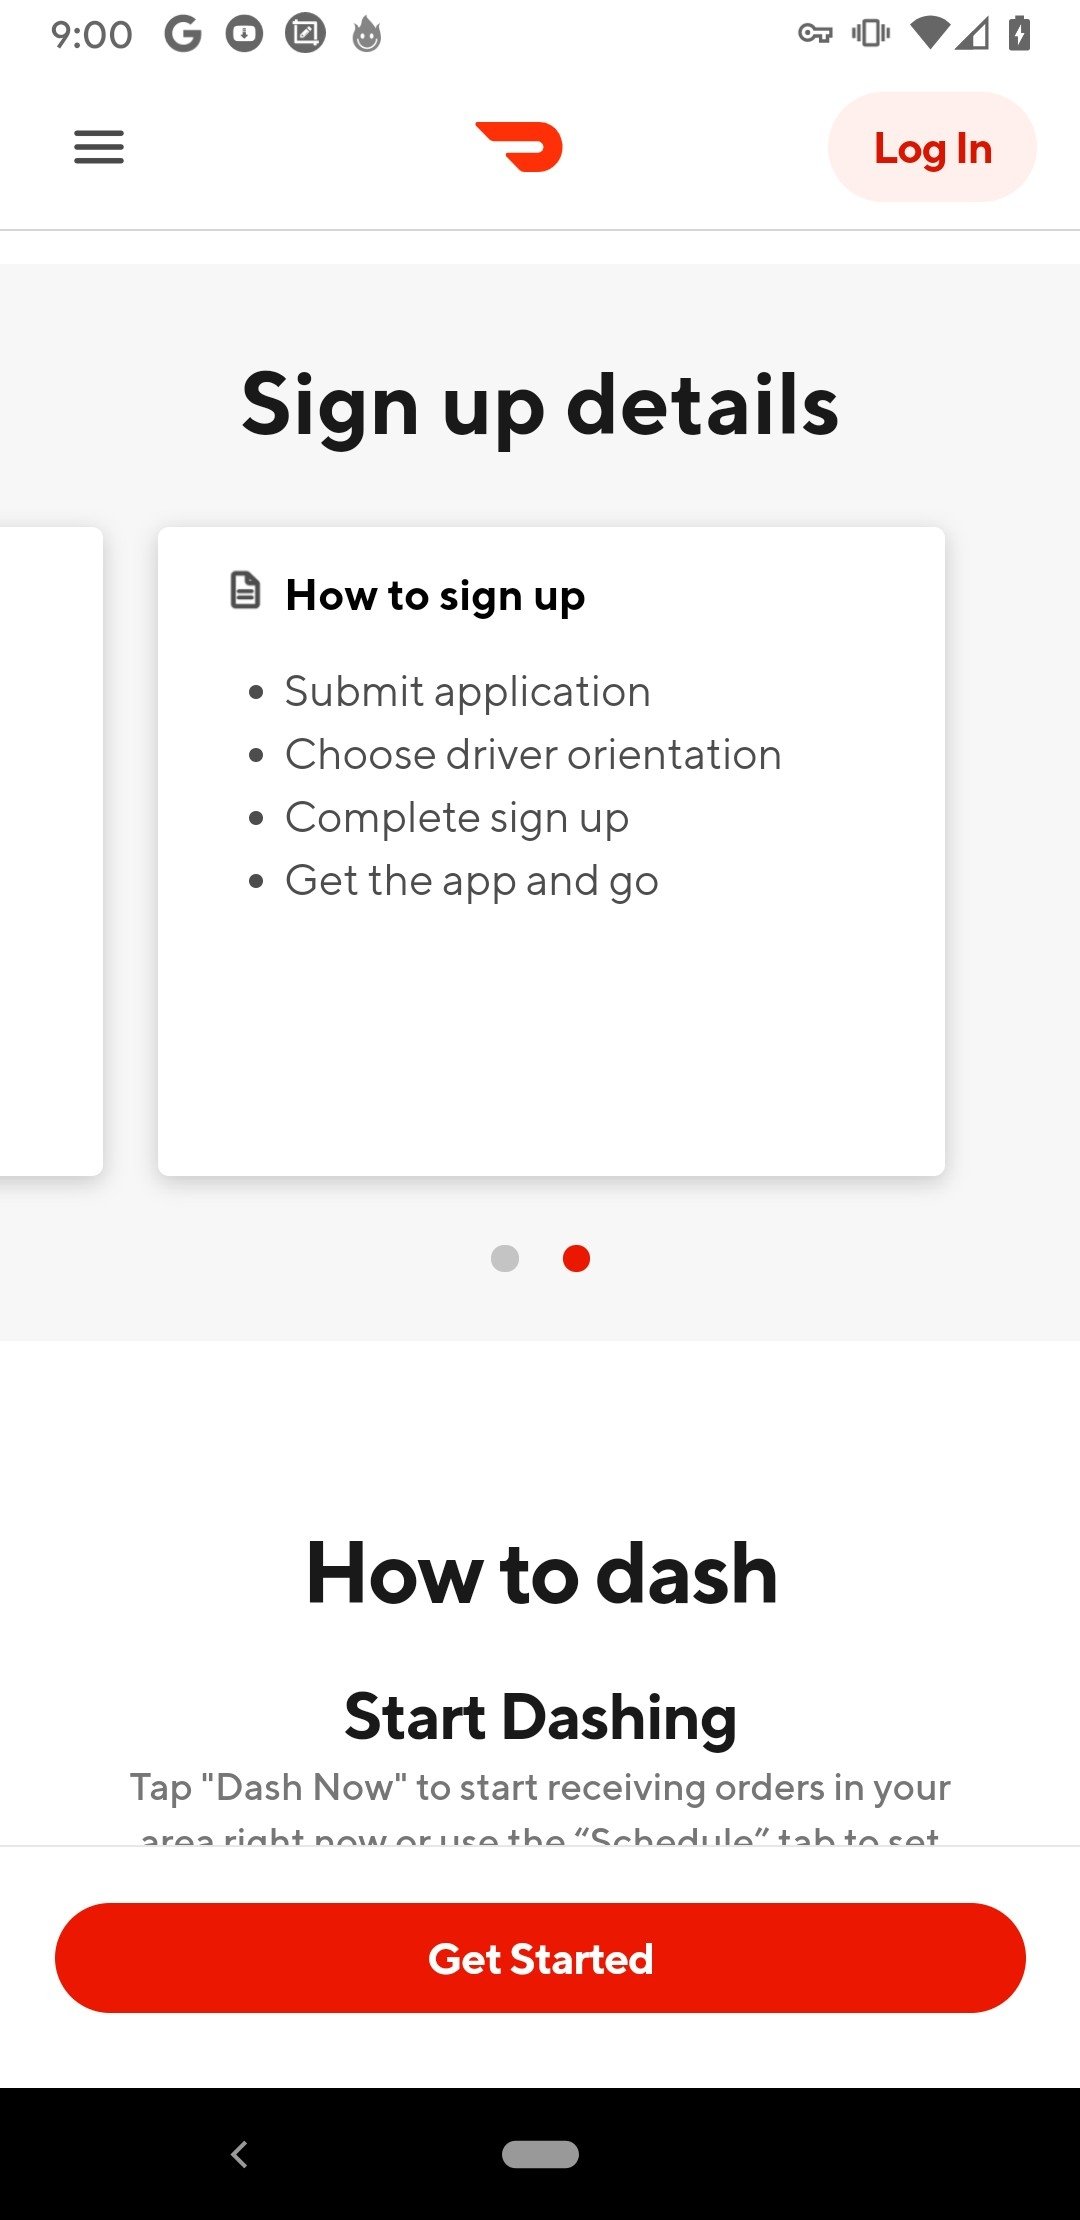 A Guide on How to Become a DoorDash Driver